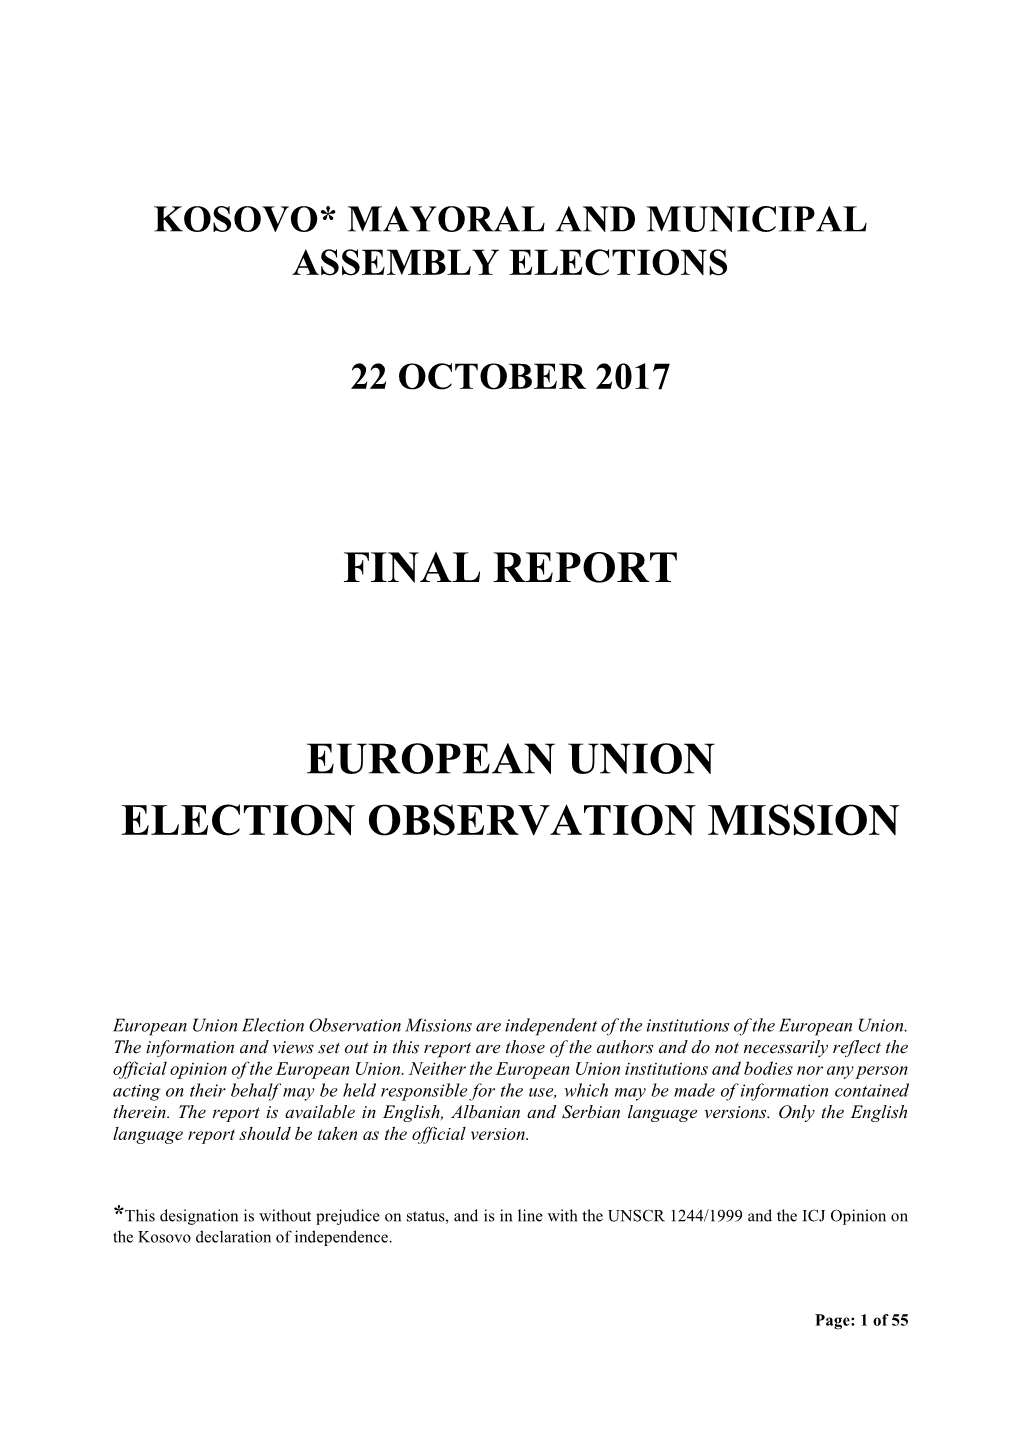 Final Report European Union Election Observation Mission